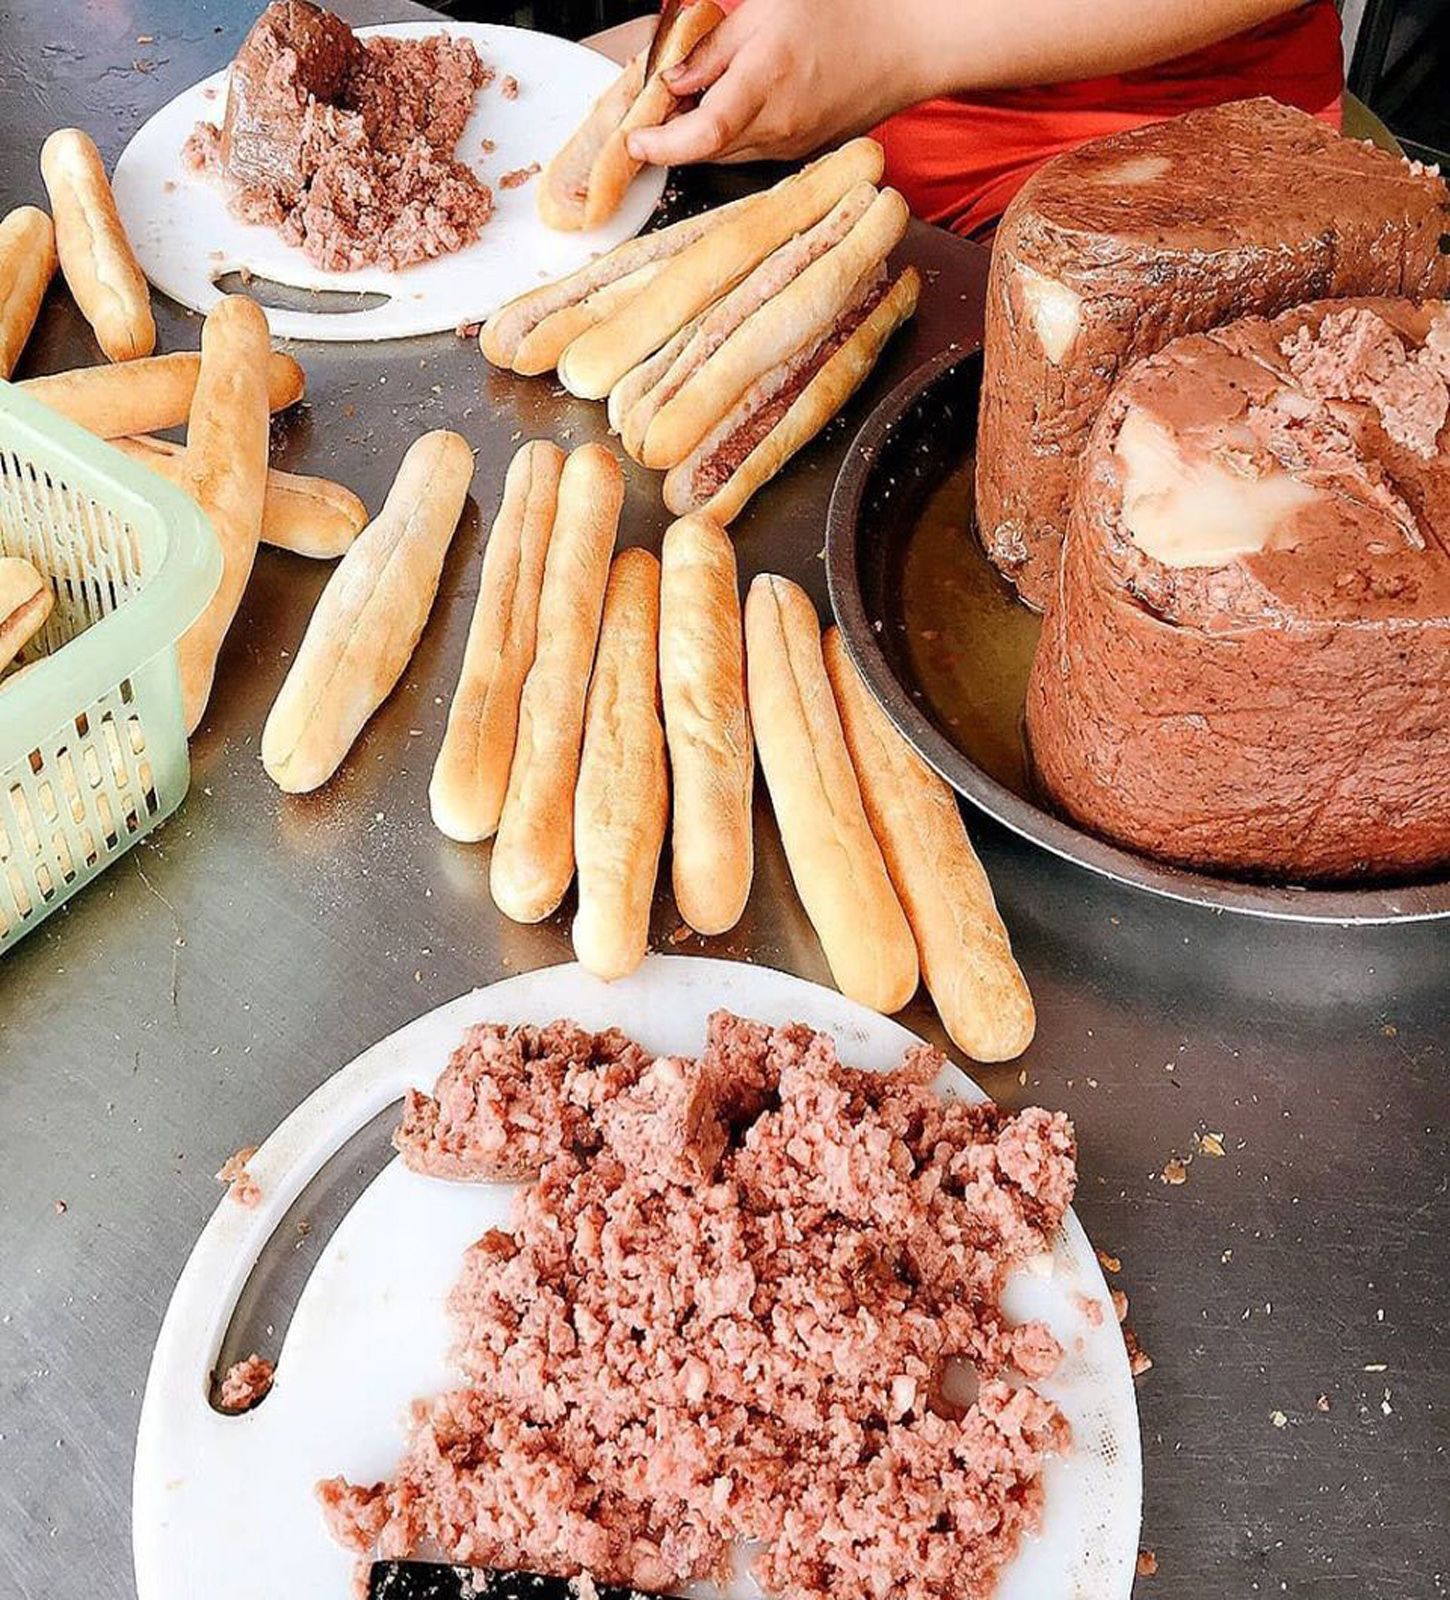 The delicious and famous sandwiches in Hai Phong are all homemade pate